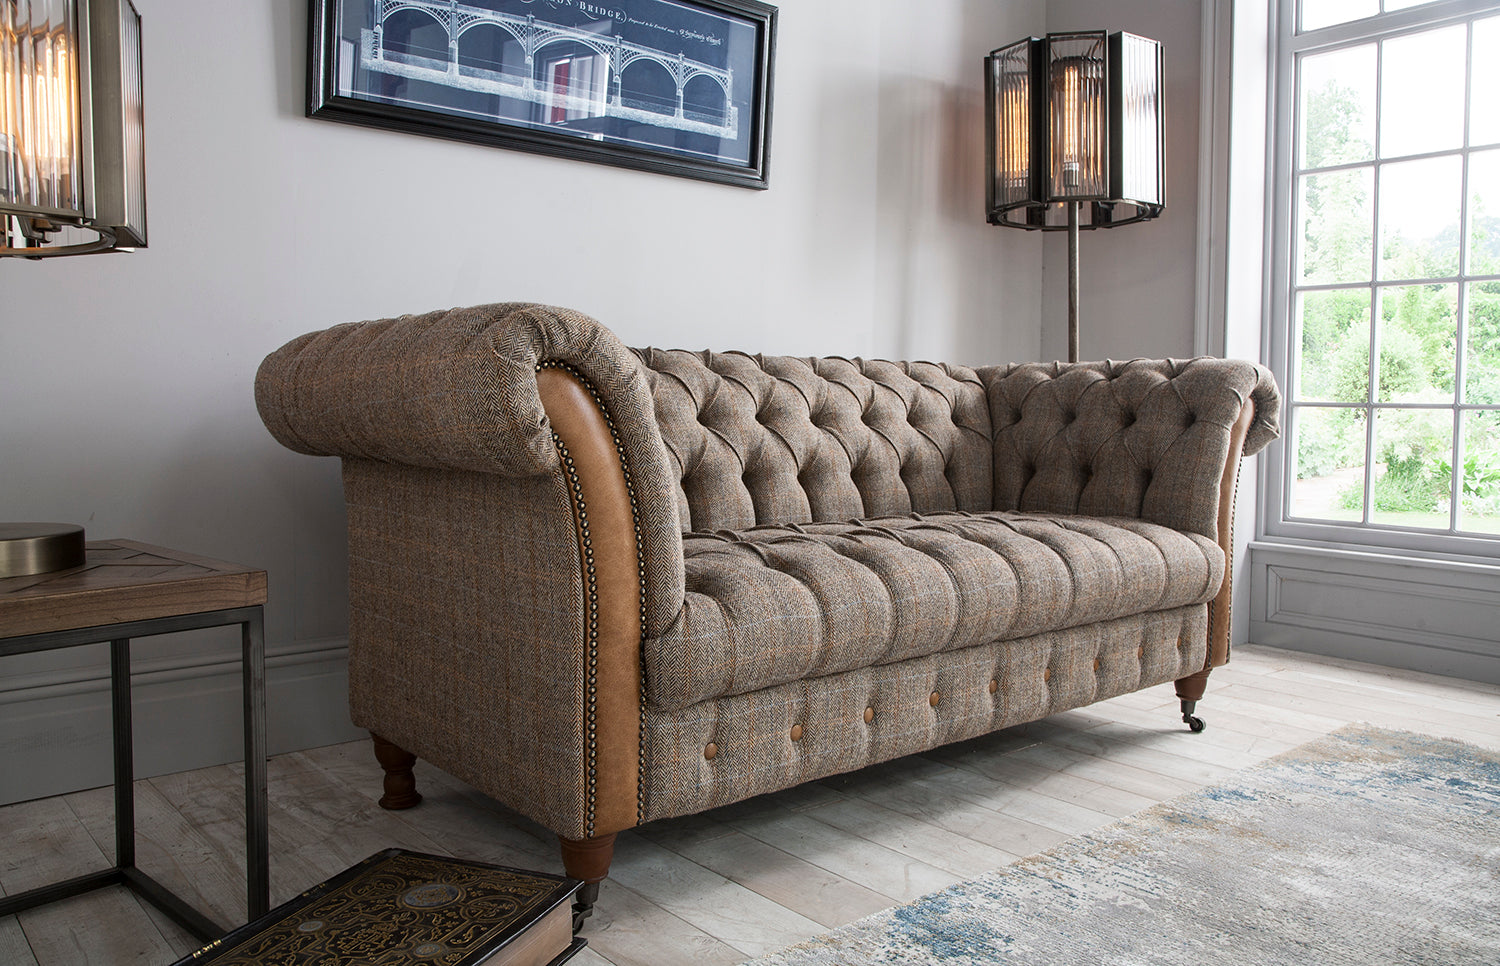 Leather and Fabric Sofas from Top Secret Furniture Outlet